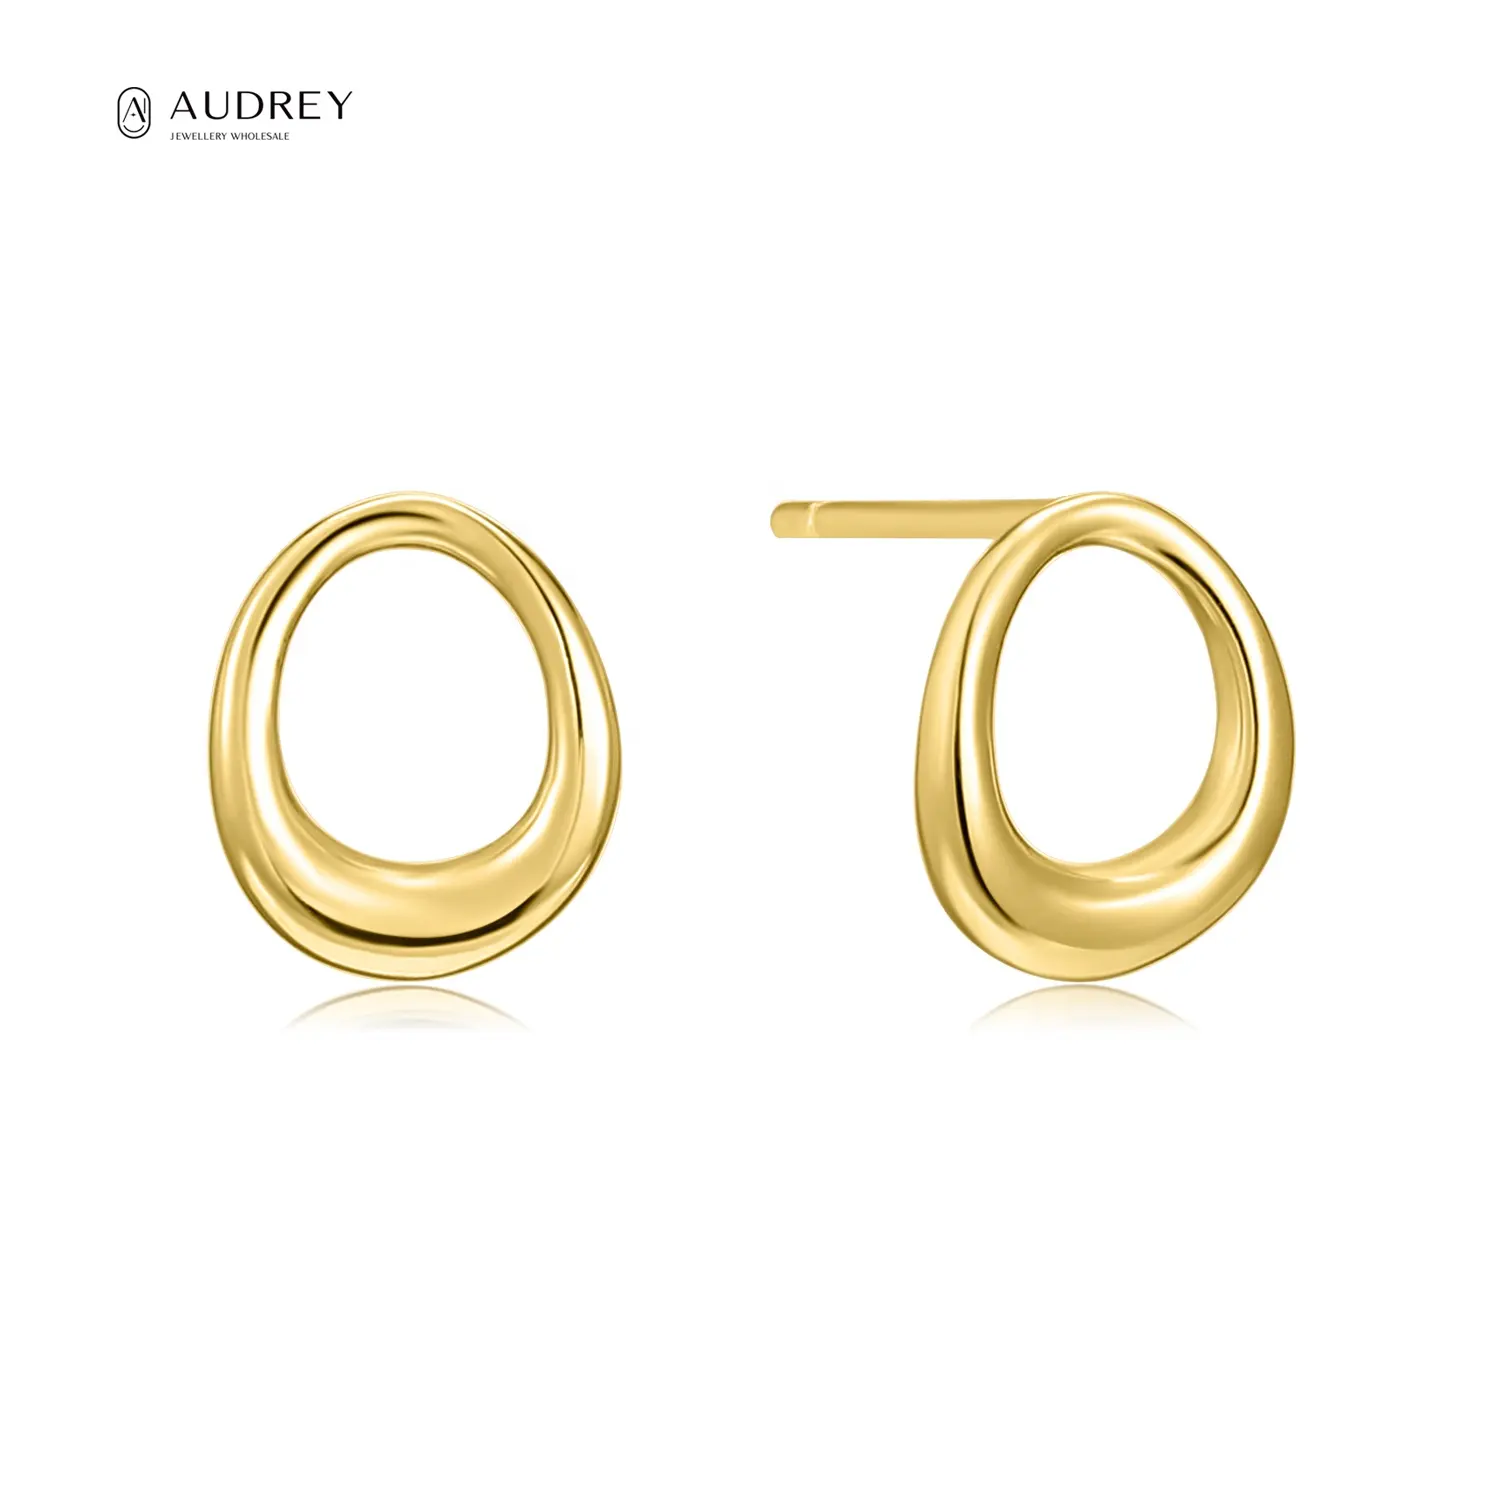 Audrey Minimalist Jewelry Round Earrings 14k Gold Plated S925 Sterling Silver Circle Stud Earrings For Women Daily Jewelry